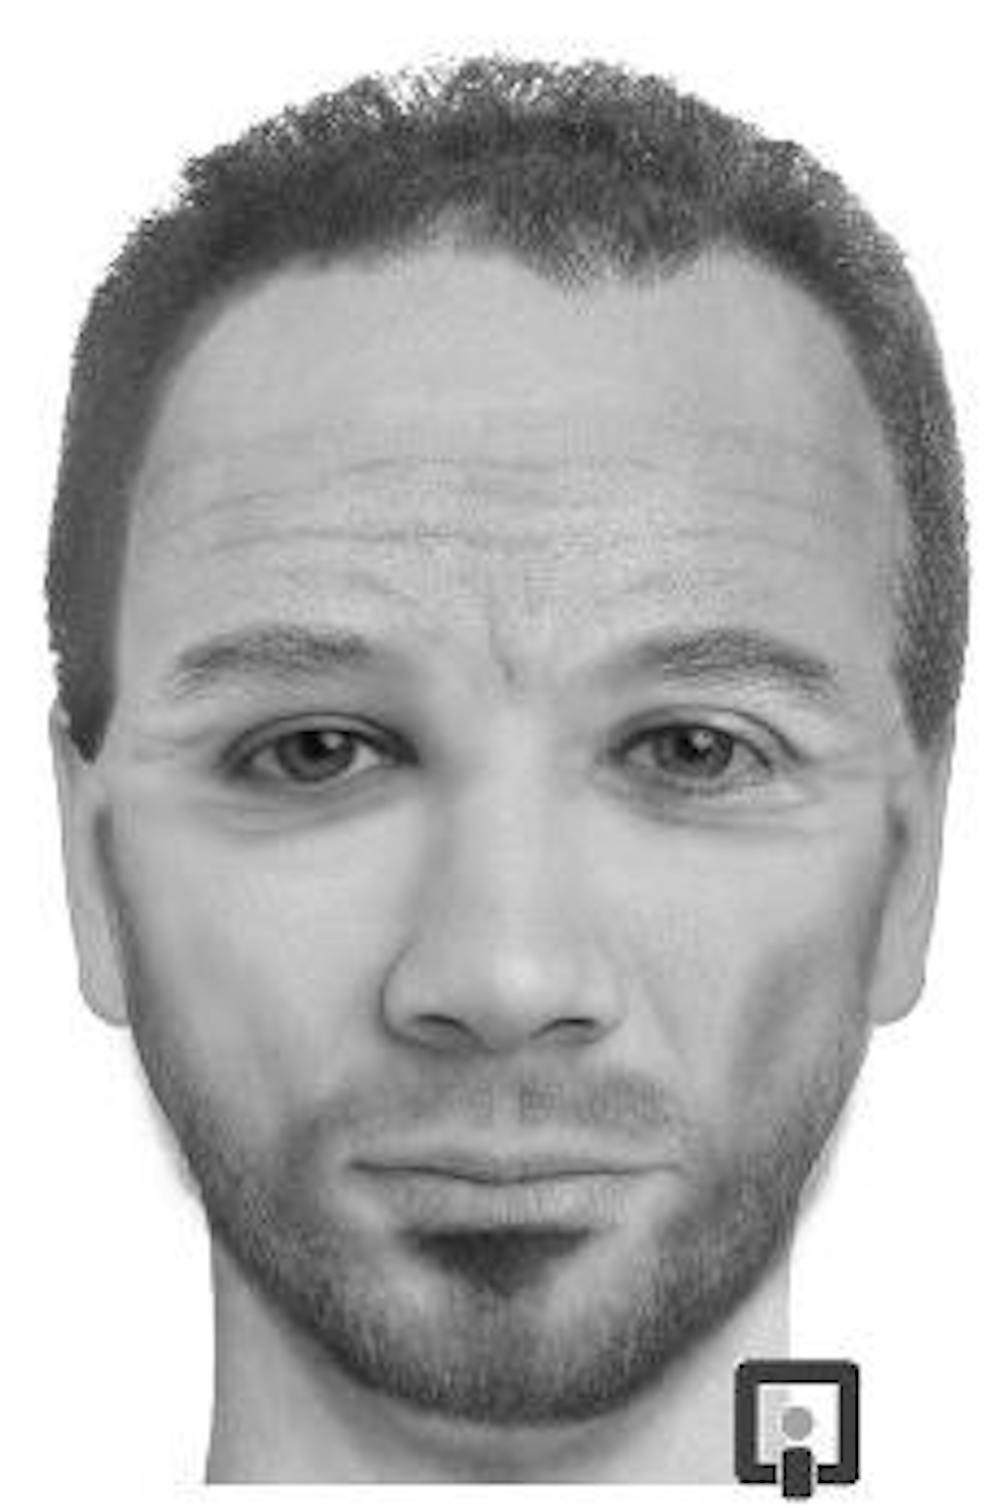 The suspect is described as a white male in his late 30s or early 40s with brown hair and facial hair.